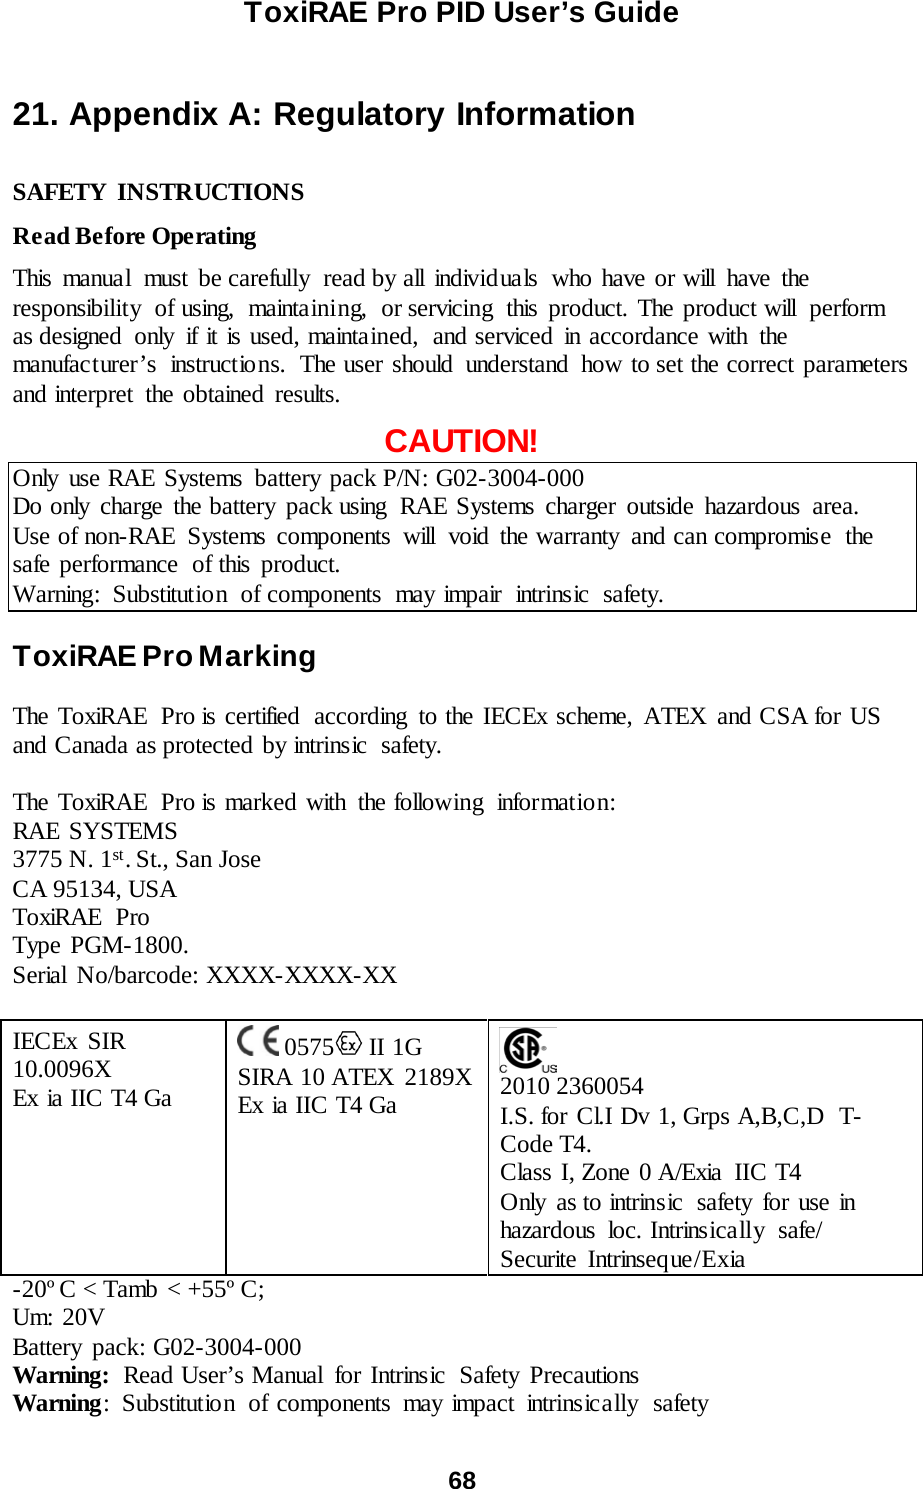 ToxiRAE Pro PID User’s Guide  68   21. Appendix A: Regulatory Information  SAFETY INSTRUCTIONS  Read Before Operating  This manual must be carefully read by all individuals who have or will have the responsibility of using, maintaining, or servicing this product. The product will perform as designed only if it is used, maintained,  and serviced in accordance with the manufacturer’s  instructions.  The user should  understand  how to set the correct parameters and interpret  the obtained results.  CAUTION! Only use RAE Systems battery pack P/N: G02-3004-000 Do only charge the battery pack using RAE Systems charger outside hazardous area. Use of non-RAE  Systems components  will  void the warranty  and can compromise  the safe performance  of this product. Warning: Substitution of components may impair intrinsic safety.  ToxiRAE Pro Marking  The ToxiRAE Pro is certified  according to the IECEx scheme, ATEX and CSA for US and Canada as protected by intrinsic  safety.    The ToxiRAE Pro is marked with the following  informatio n: RAE SYSTEMS  3775 N. 1st. St., San Jose CA 95134, USA ToxiRAE Pro Type PGM-1800. Serial No/barcode: XXXX-XXXX-XX   IECEx SIR 10.0096X Ex ia IIC T4 Ga    0575  II 1G  SIRA 10 ATEX  2189X Ex ia IIC T4 Ga      2010 2360054 I.S. for Cl.I Dv 1, Grps A,B,C,D  T-Code T4. Class I, Zone 0 A/Exia  IIC T4 Only as to intrinsic  safety for use in hazardous  loc. Intrinsically  safe/ Securite Intrinseque/Exia -20º C &lt; Tamb &lt; +55º C; Um: 20V Battery pack: G02-3004-000 Warning: Read User’s Manual  for Intrinsic  Safety Precautions Warning: Substitutio n of components may impact intrinsically safety 